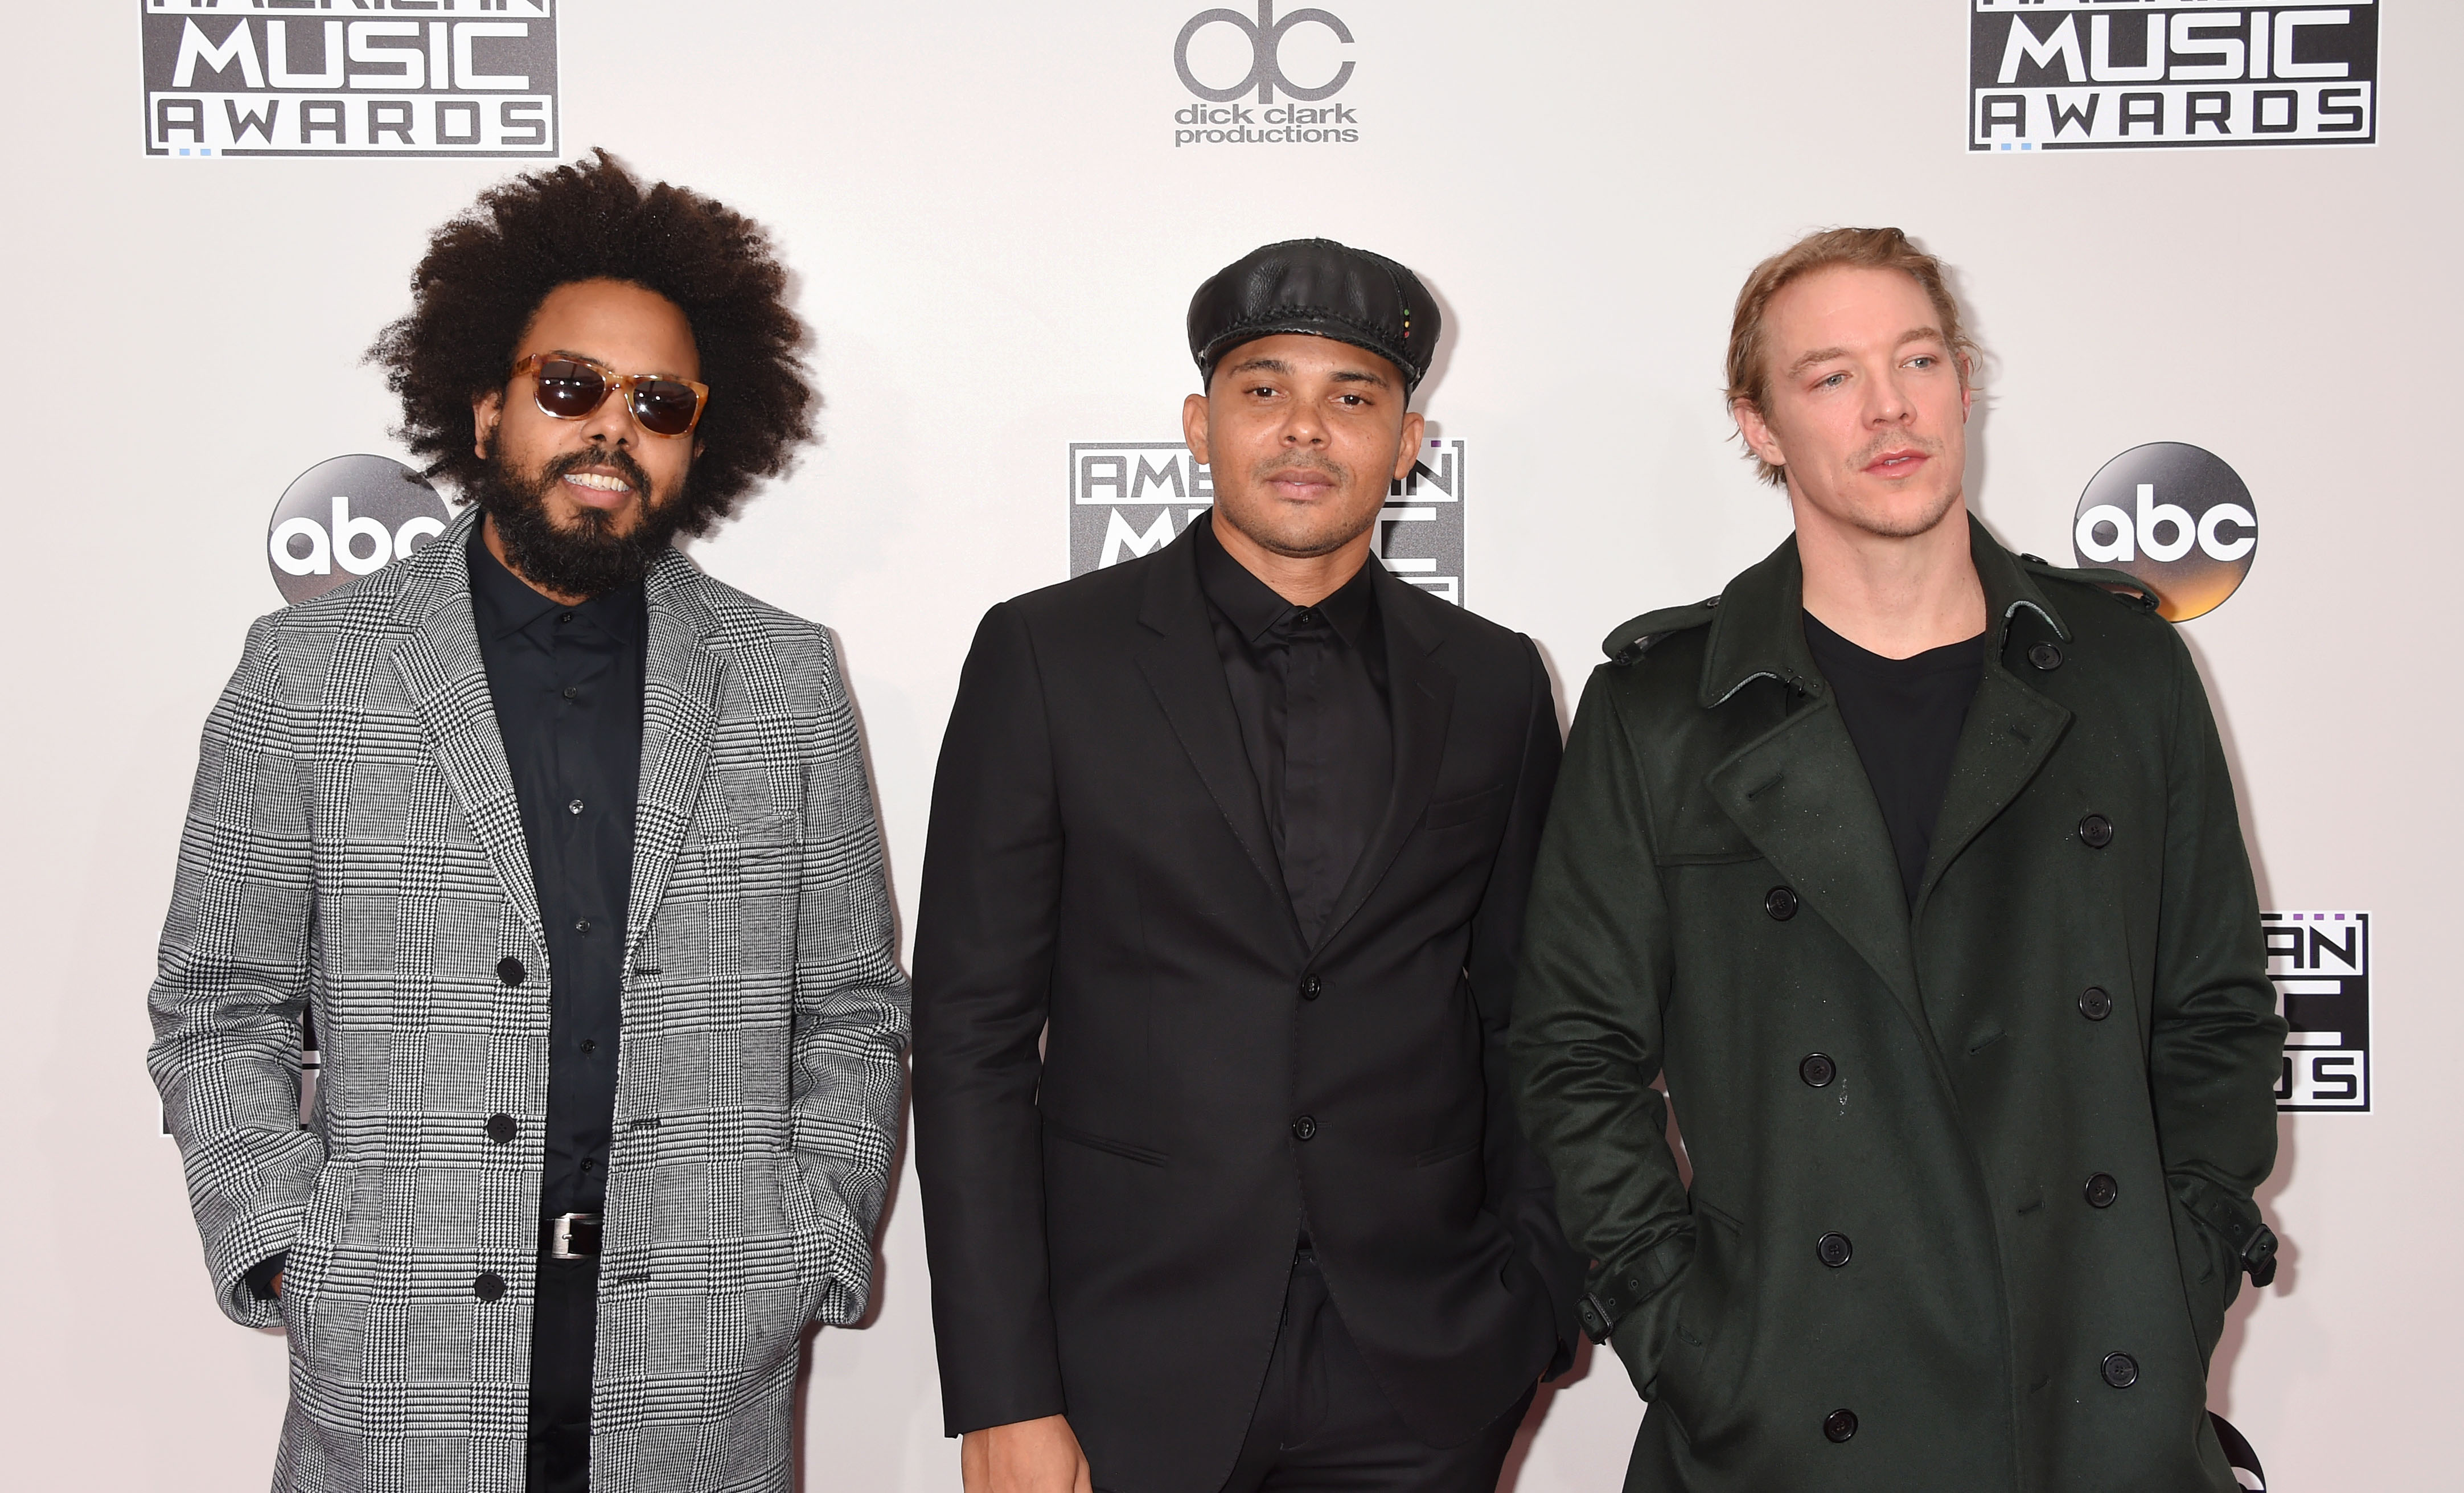 (L-R) Jillionaire, Walshy Fire and Diplo of Major Lazer arrive at the 2016 American Music Awards at Microsoft Theater on November 20, 2016 in Los Angeles, California. (Jeffrey Mayer—WireImage/Getty Images)